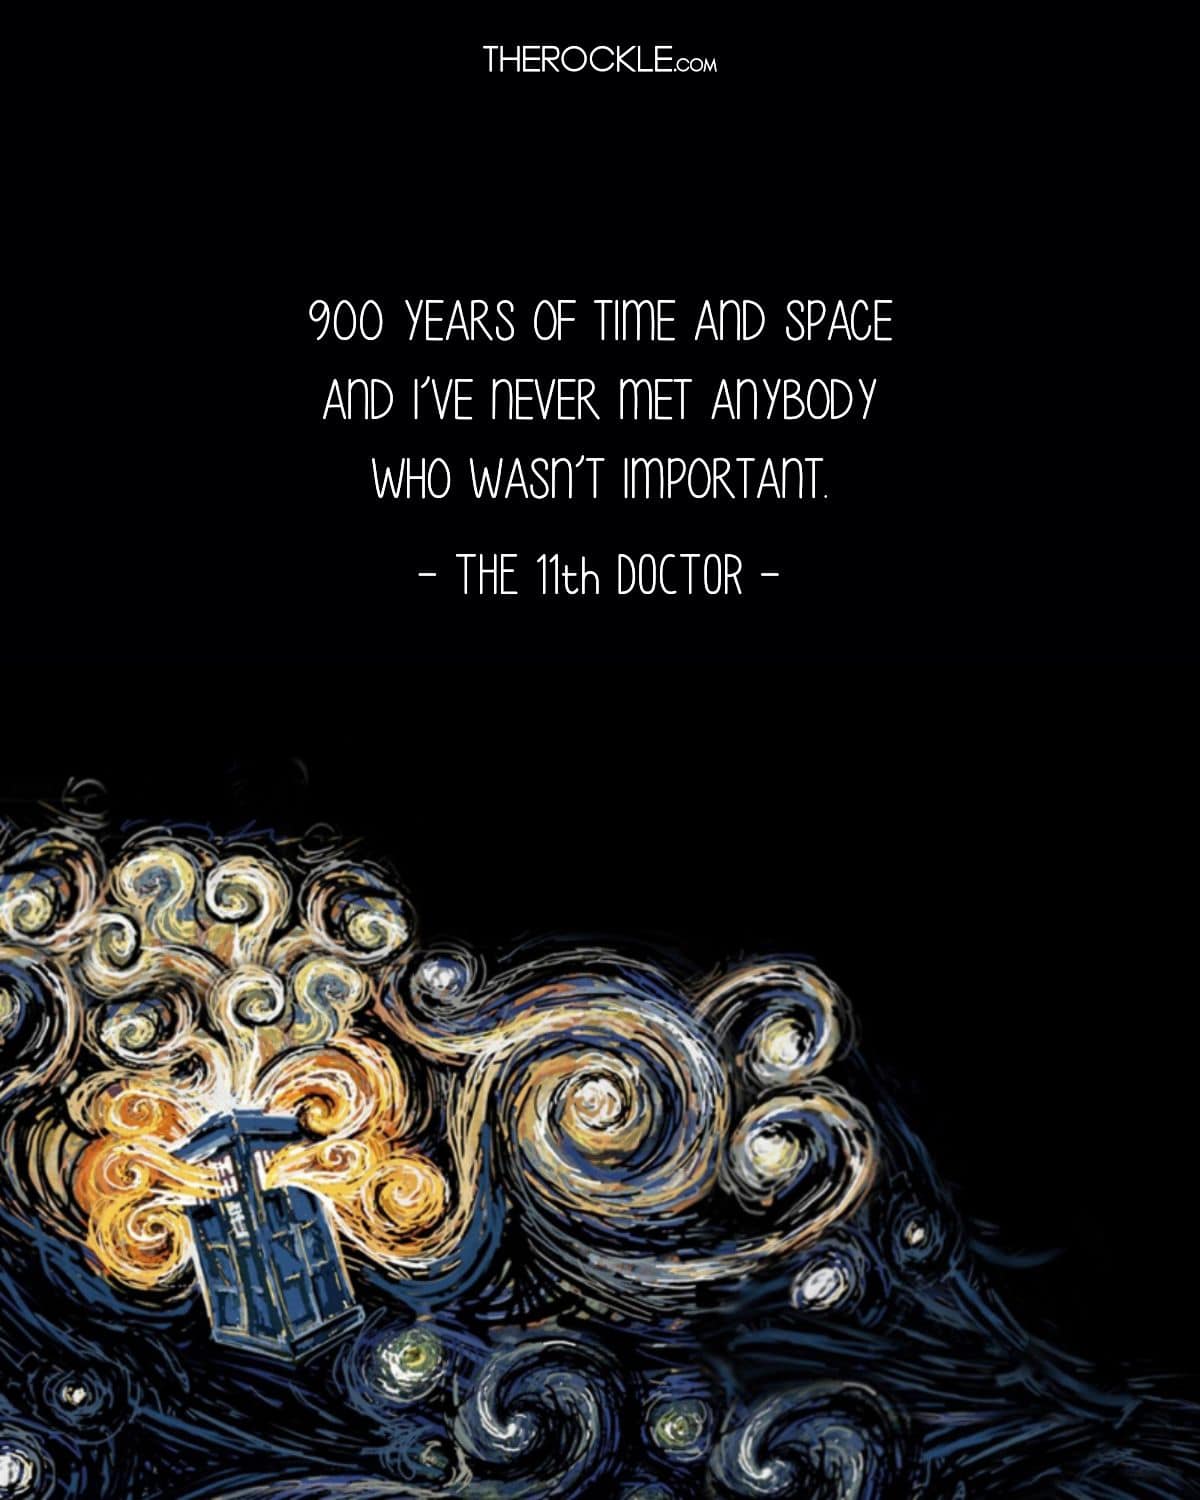 Doctor Who quote about the significance of life